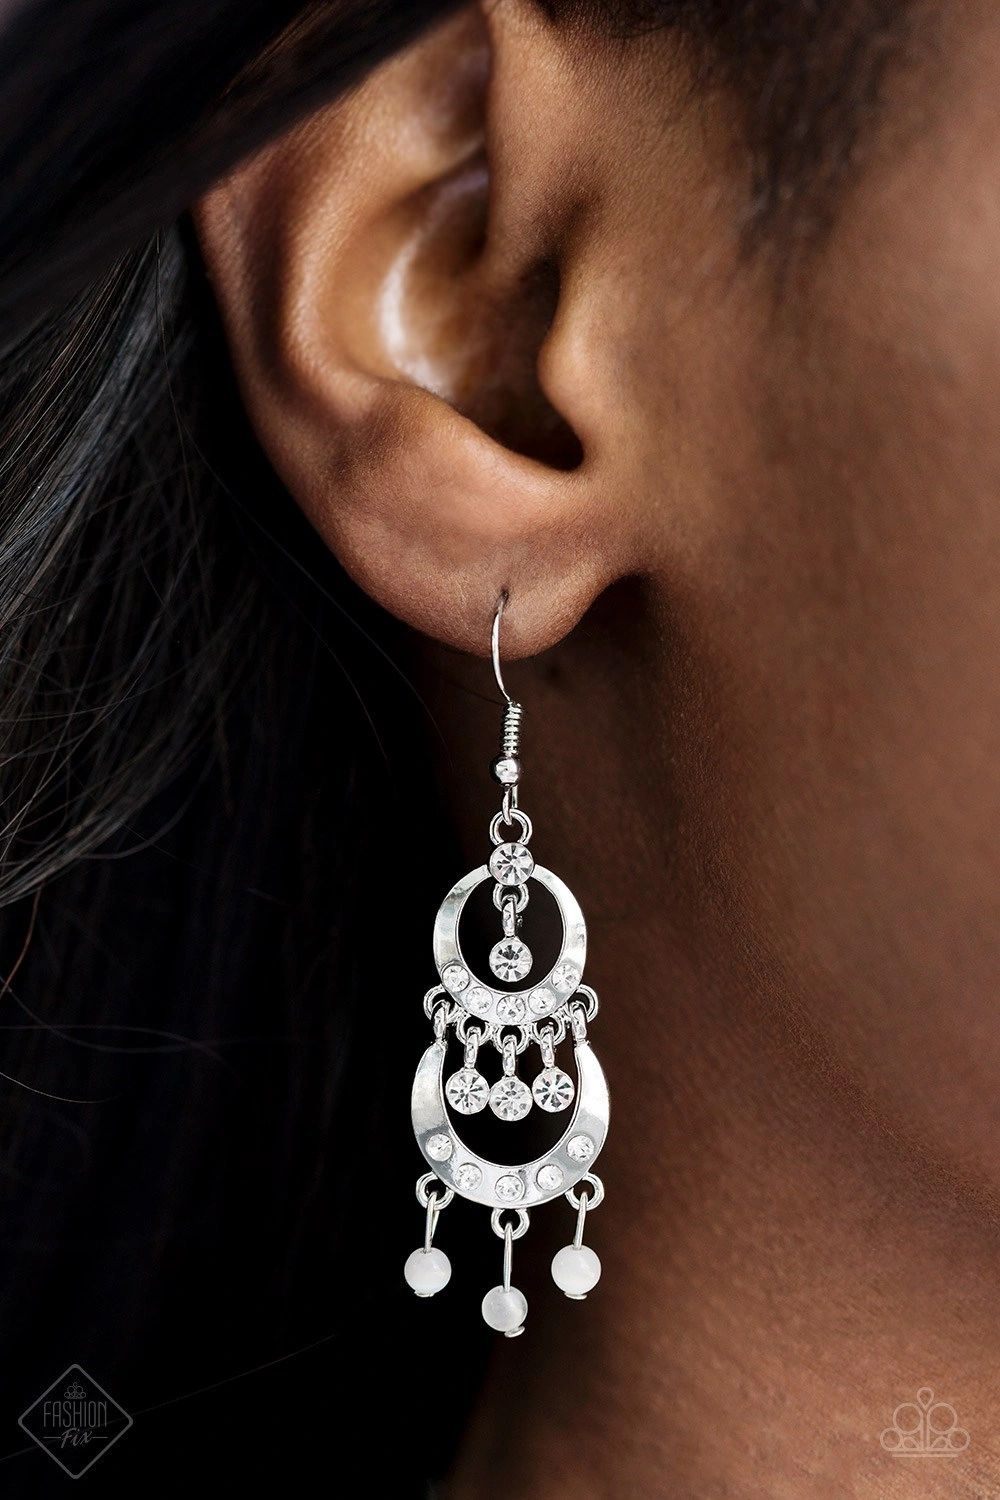 Paparazzi Mainstage Meet and Greet White Fishhook Earrings - Fashion Fix Fiercely 5th Avenue February 2019